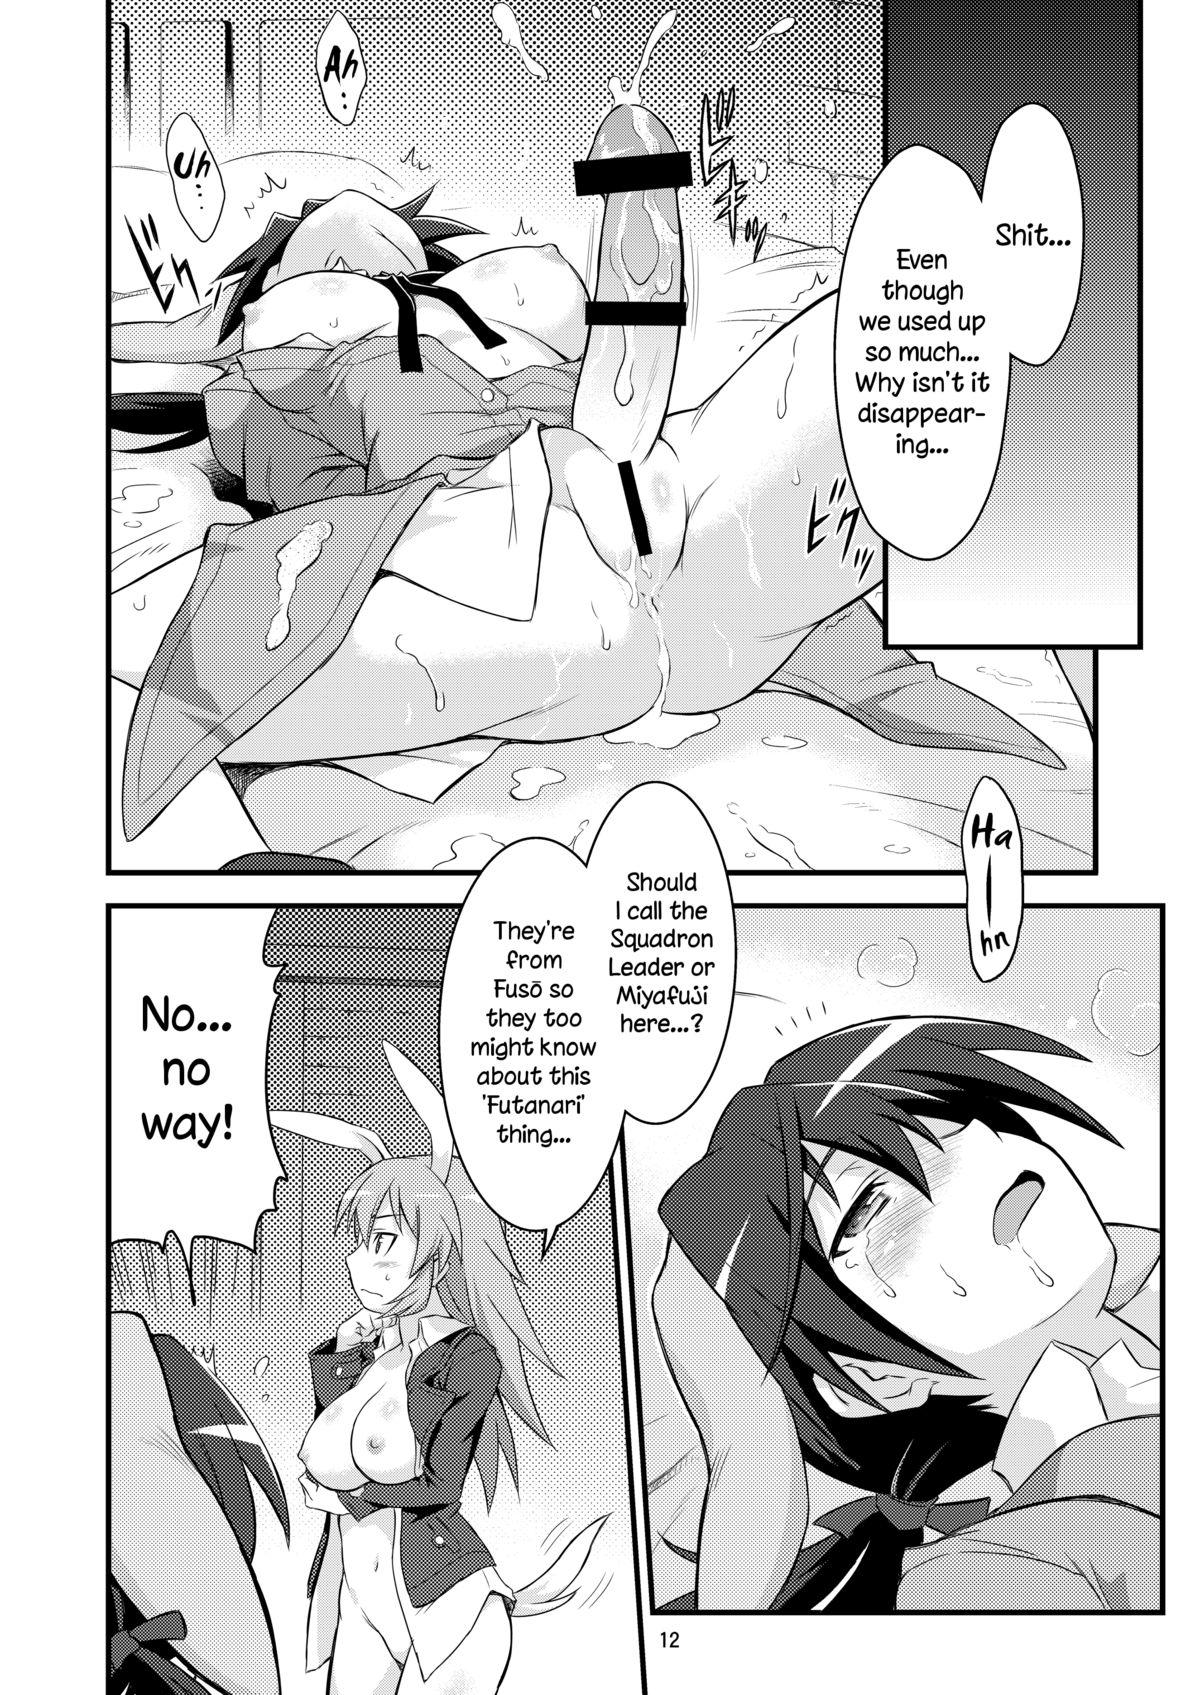 Freak Shir and Gert in Big Trouble - Strike witches Culos - Page 12